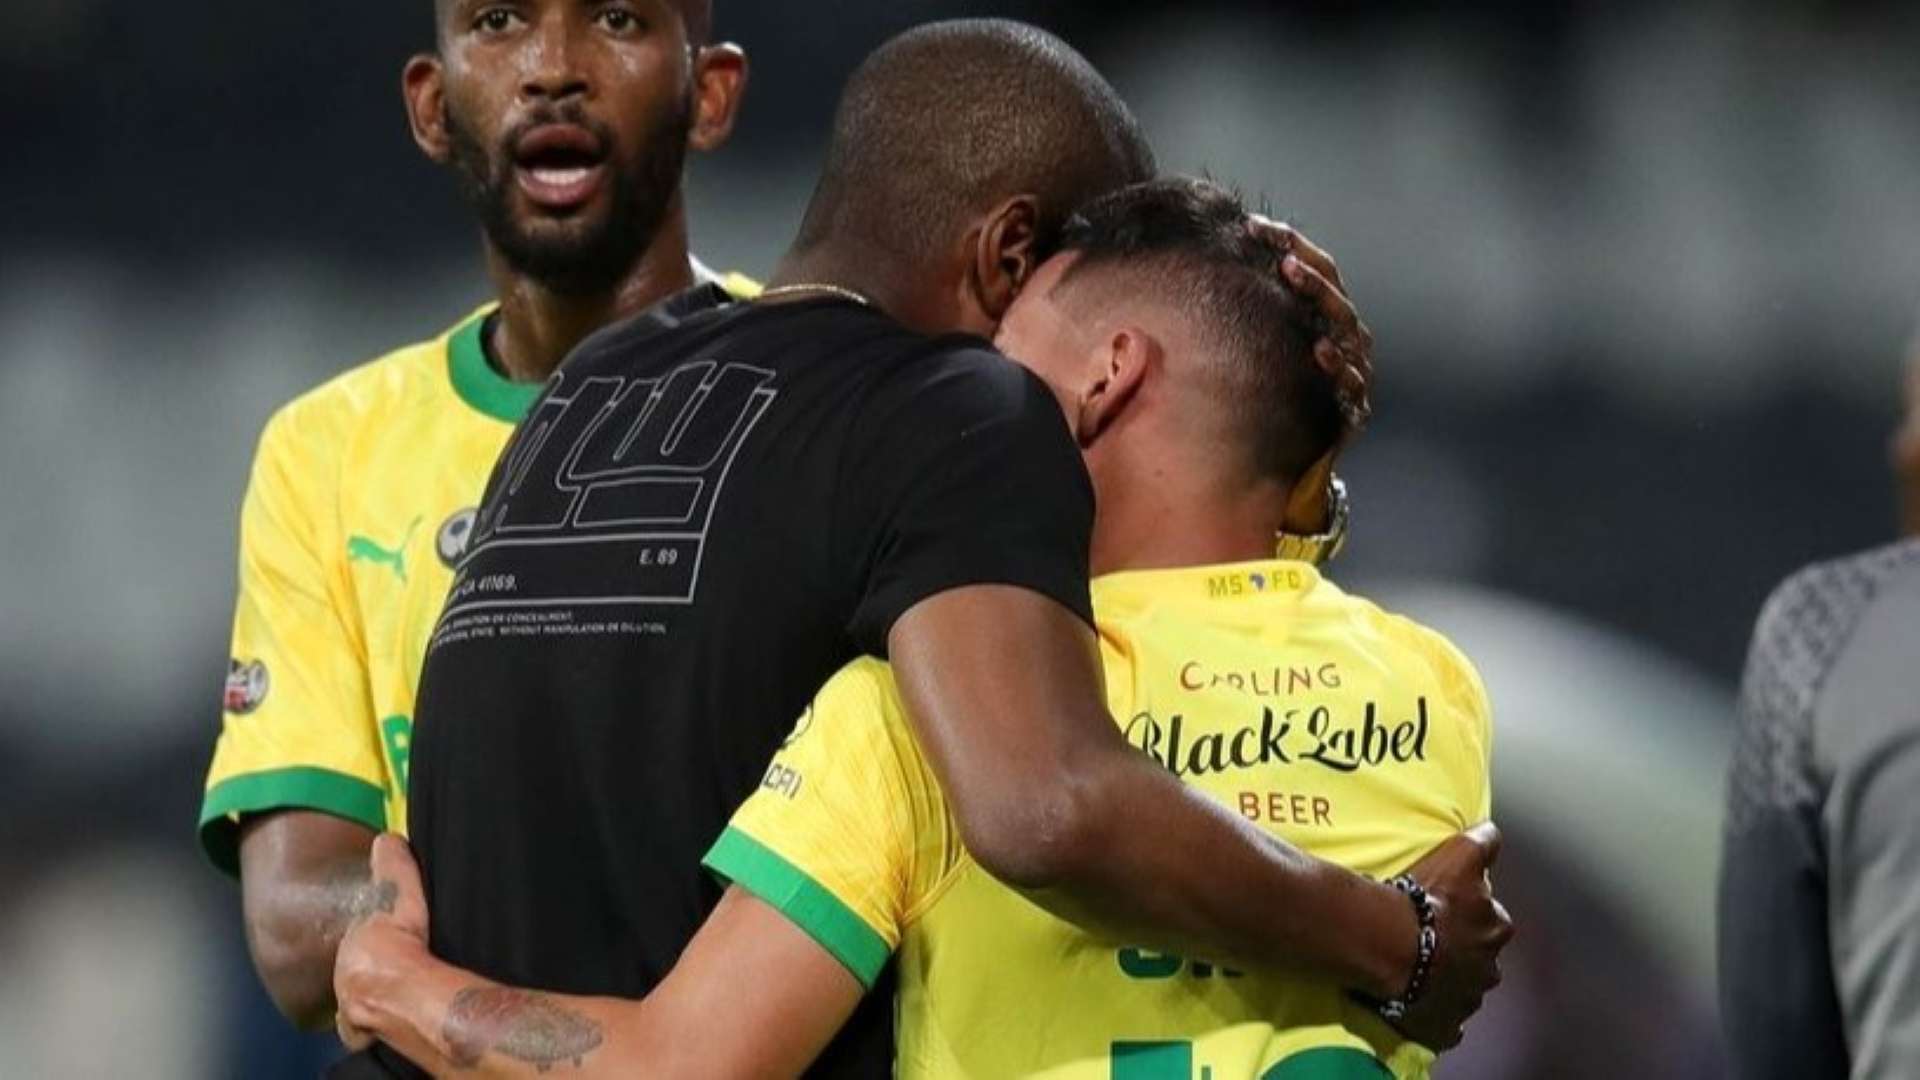 Mamelodi Sundowns' loss in MTN8 against Orlando Pirates still haunting  Mokwena in AFL! Big teams not supposed to complain' - Fans | Goal.com